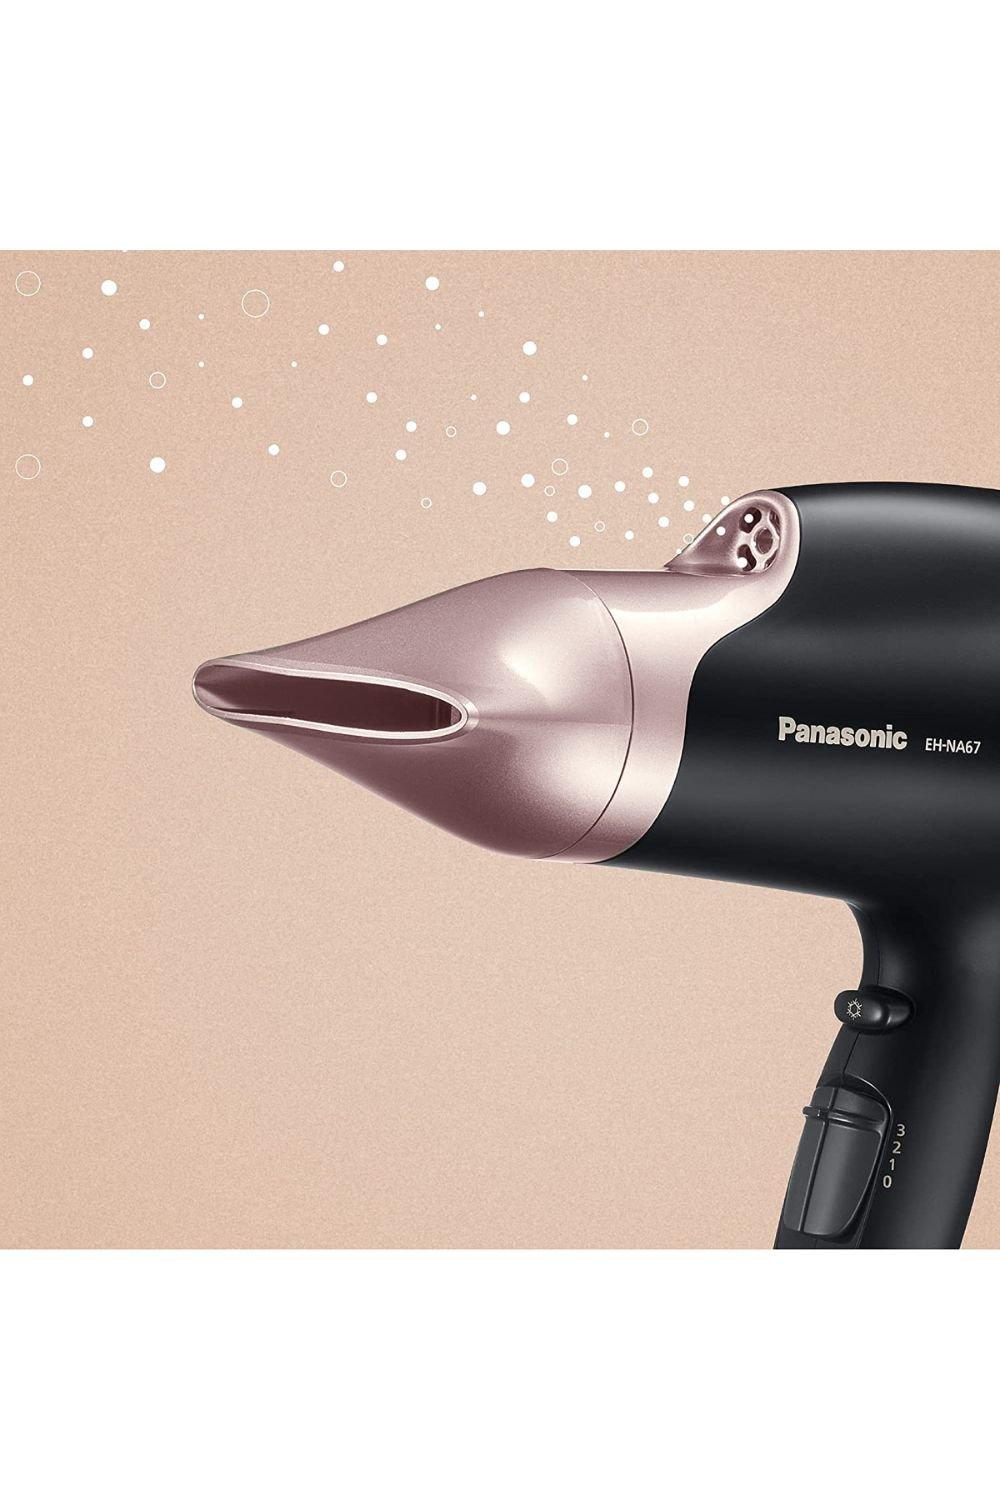 Hair Styling Tools | EH-NA67 nanoe Hair Dryer with Diffuser and Oscillating  Nozzle for Scalp Protection (Pink Gold) | Panasonic